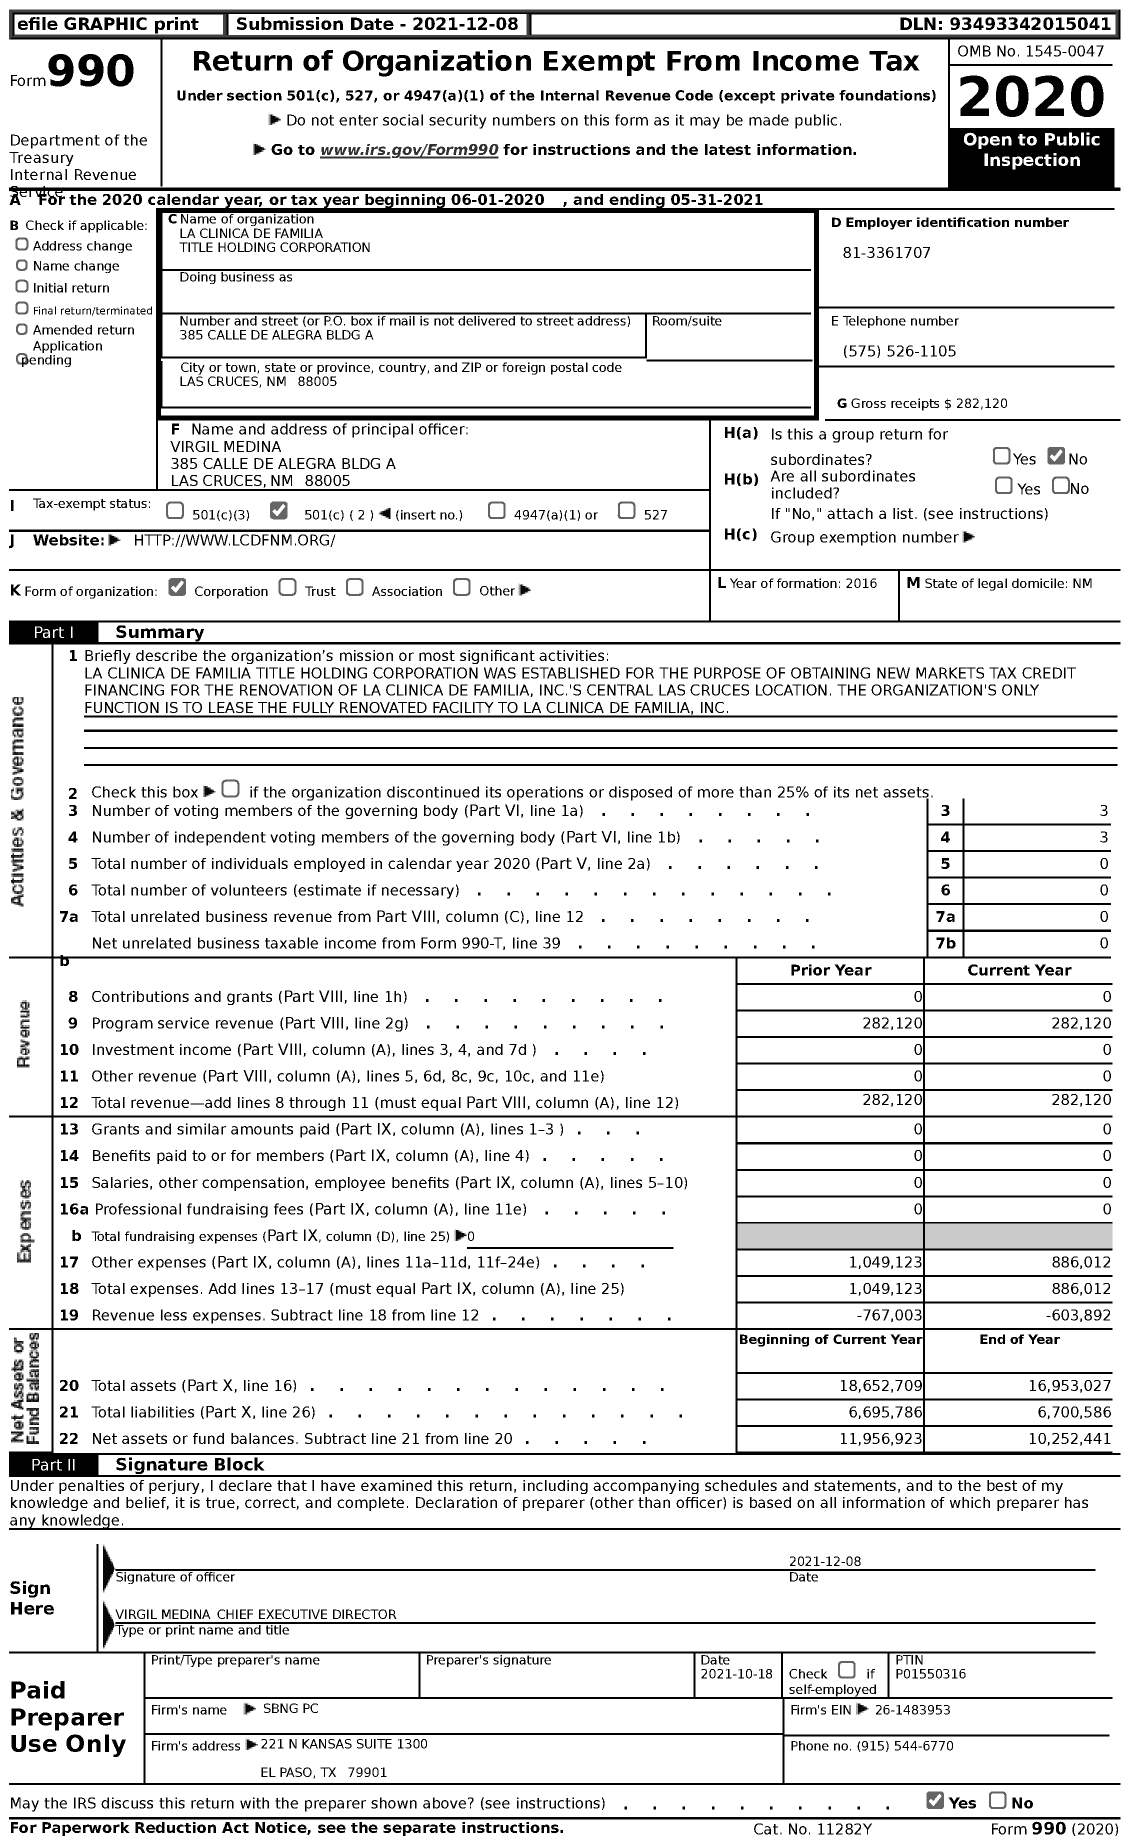 Image of first page of 2020 Form 990 for La Clinica de Familia Title Holding Corporation